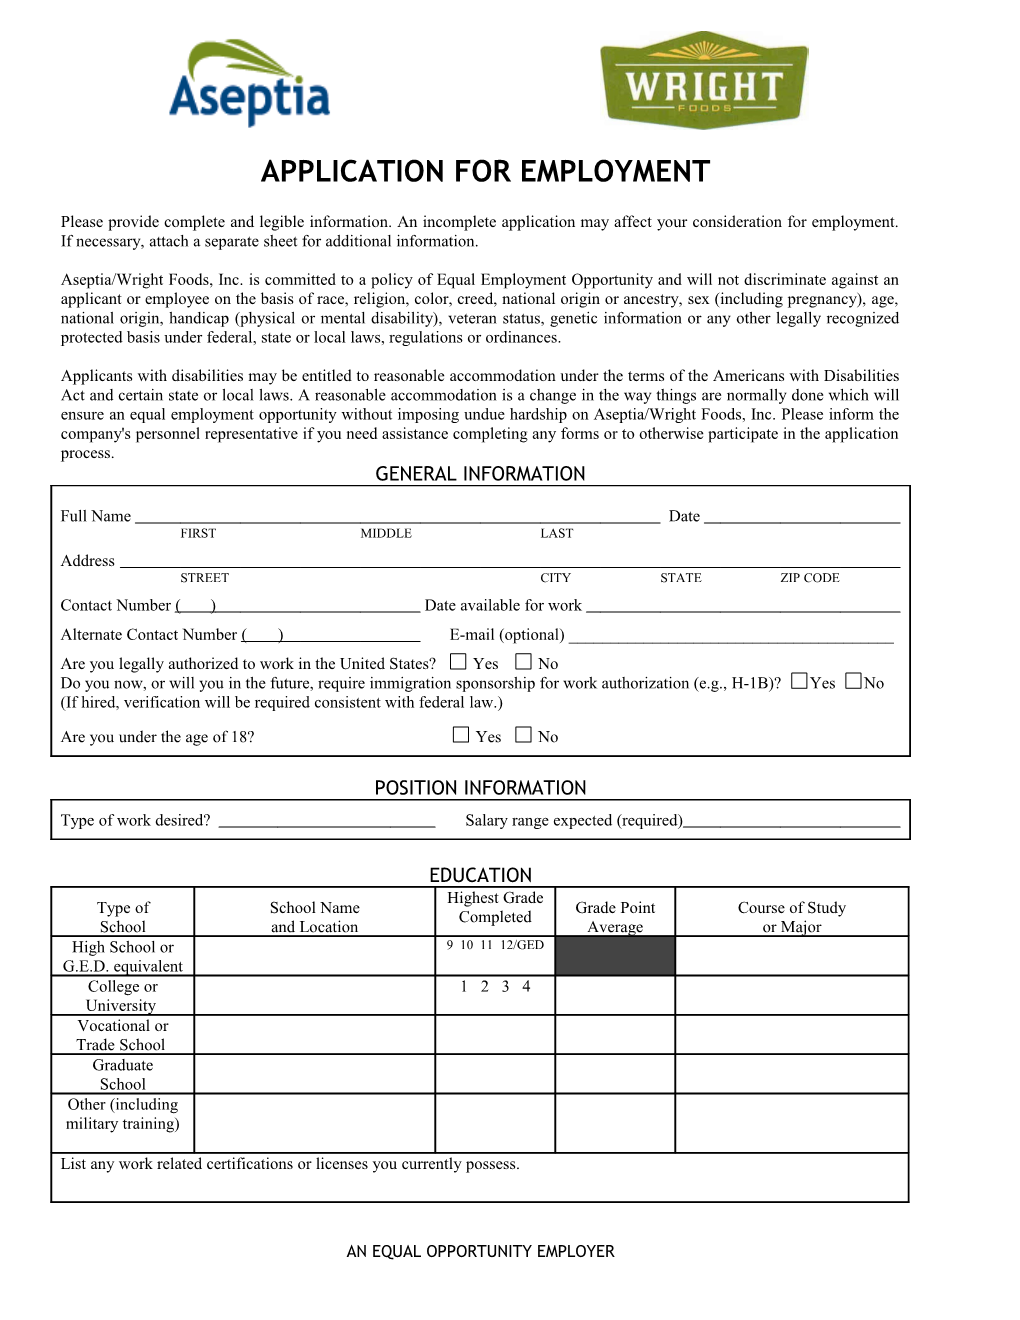 Application for Employment s73